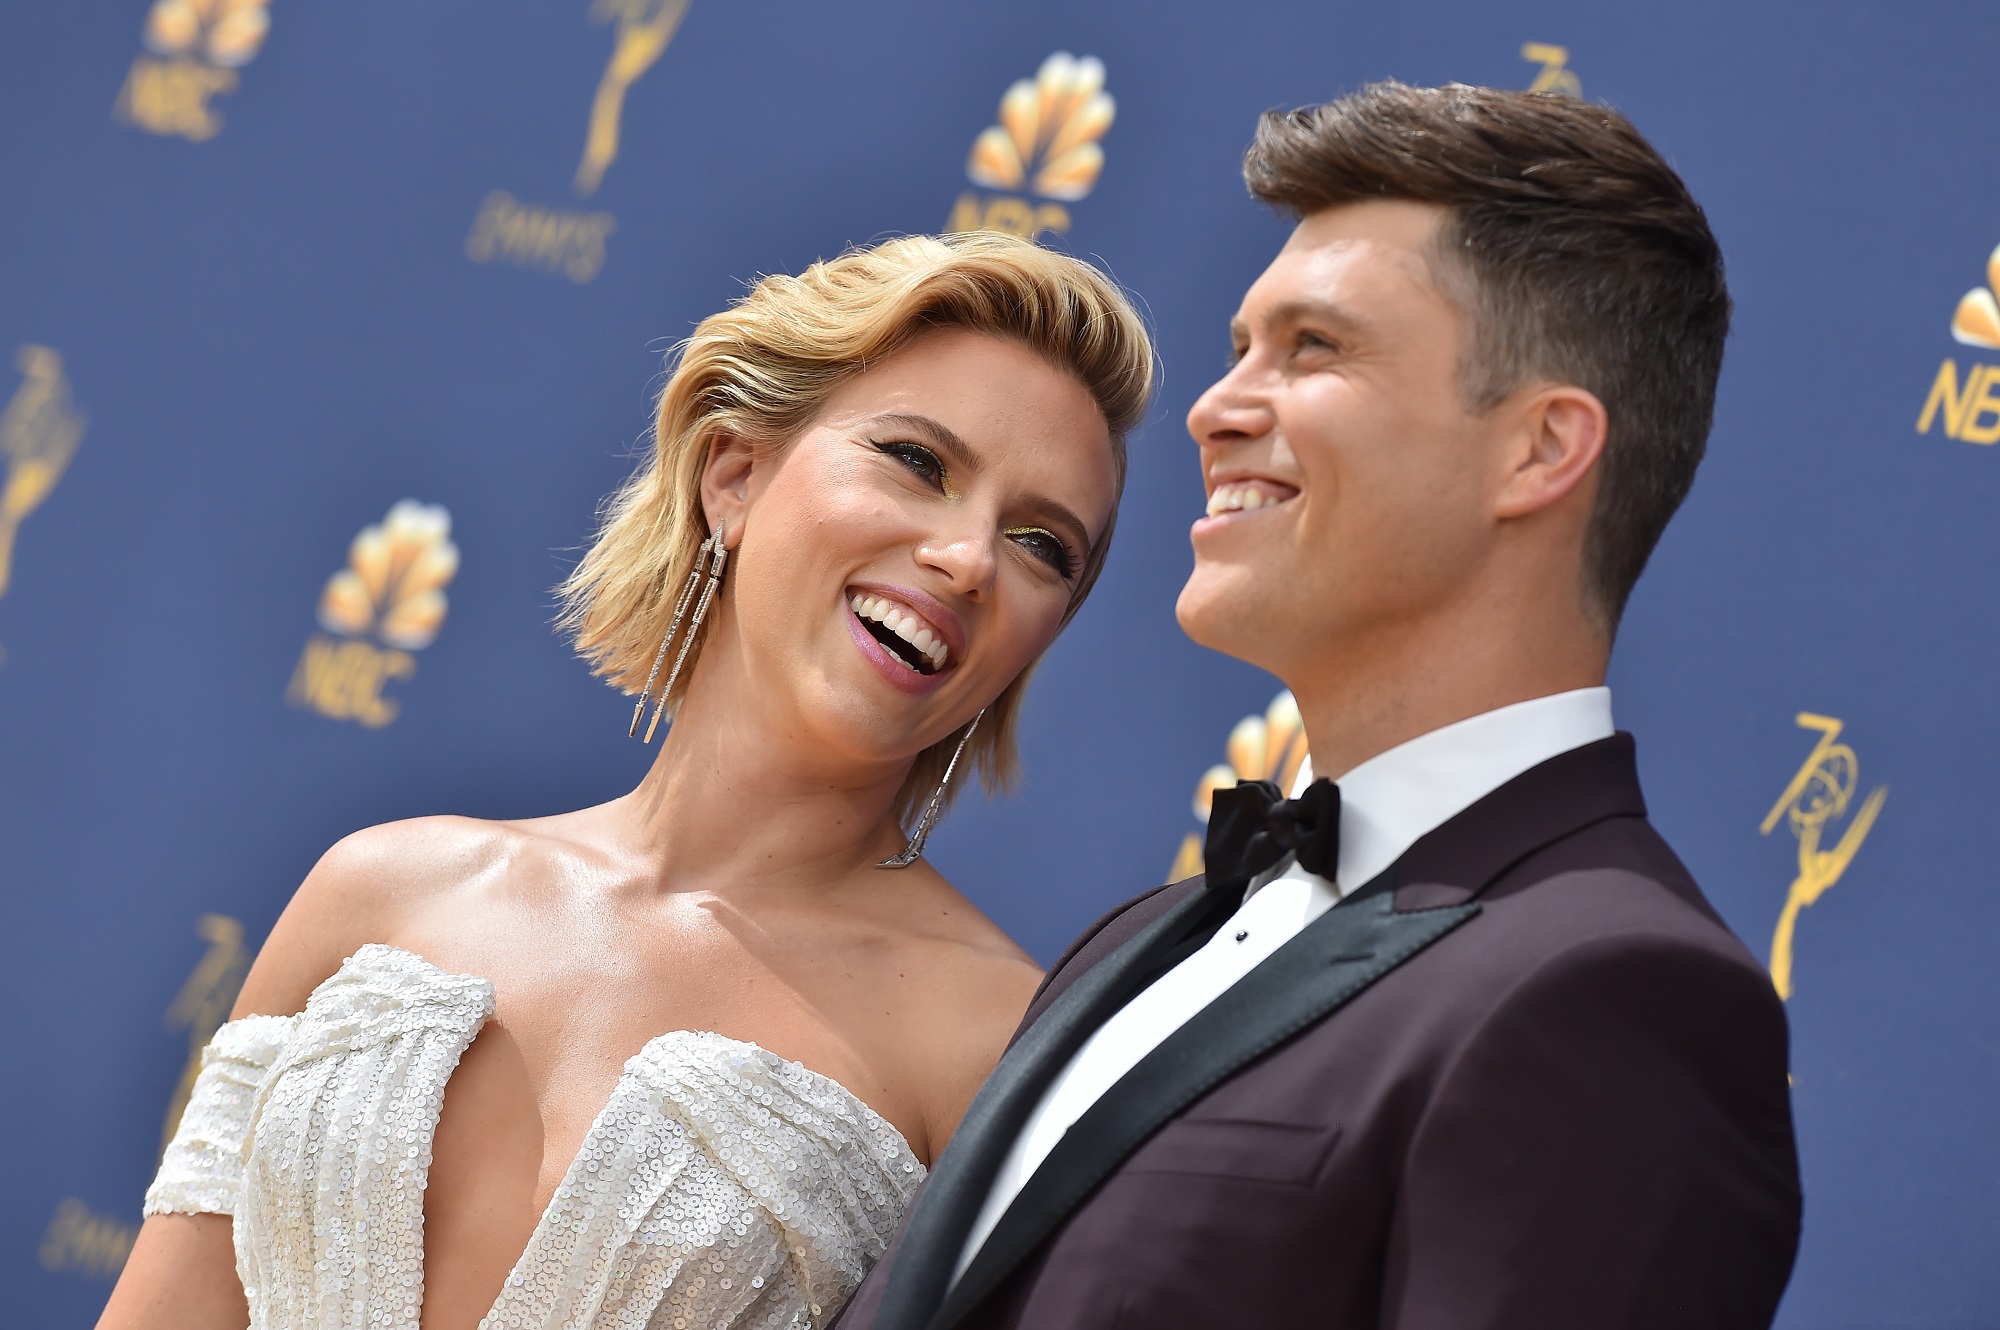 Scarlett Johansson and Colin Jost attend the 70th Emmy Awards on September 17, 2018